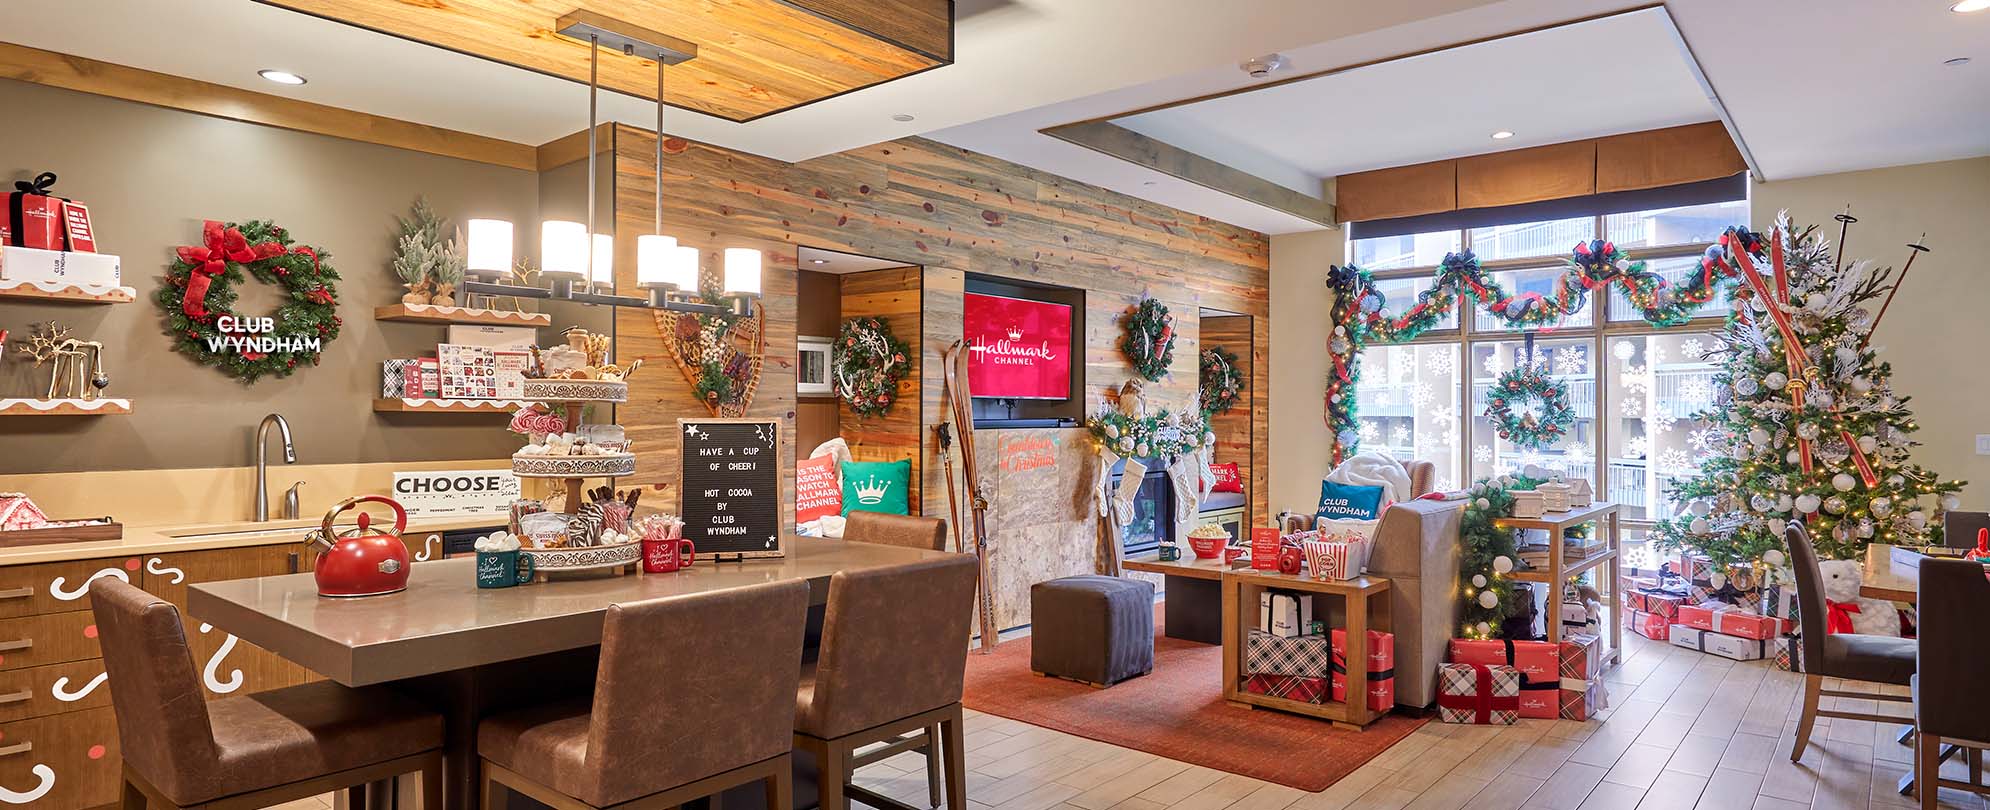 A kitchen and living area decorated in Christmas decorations for the Hallmark Channel Countdown to Christmas at Club Wyndham Midtown 45 in New York City